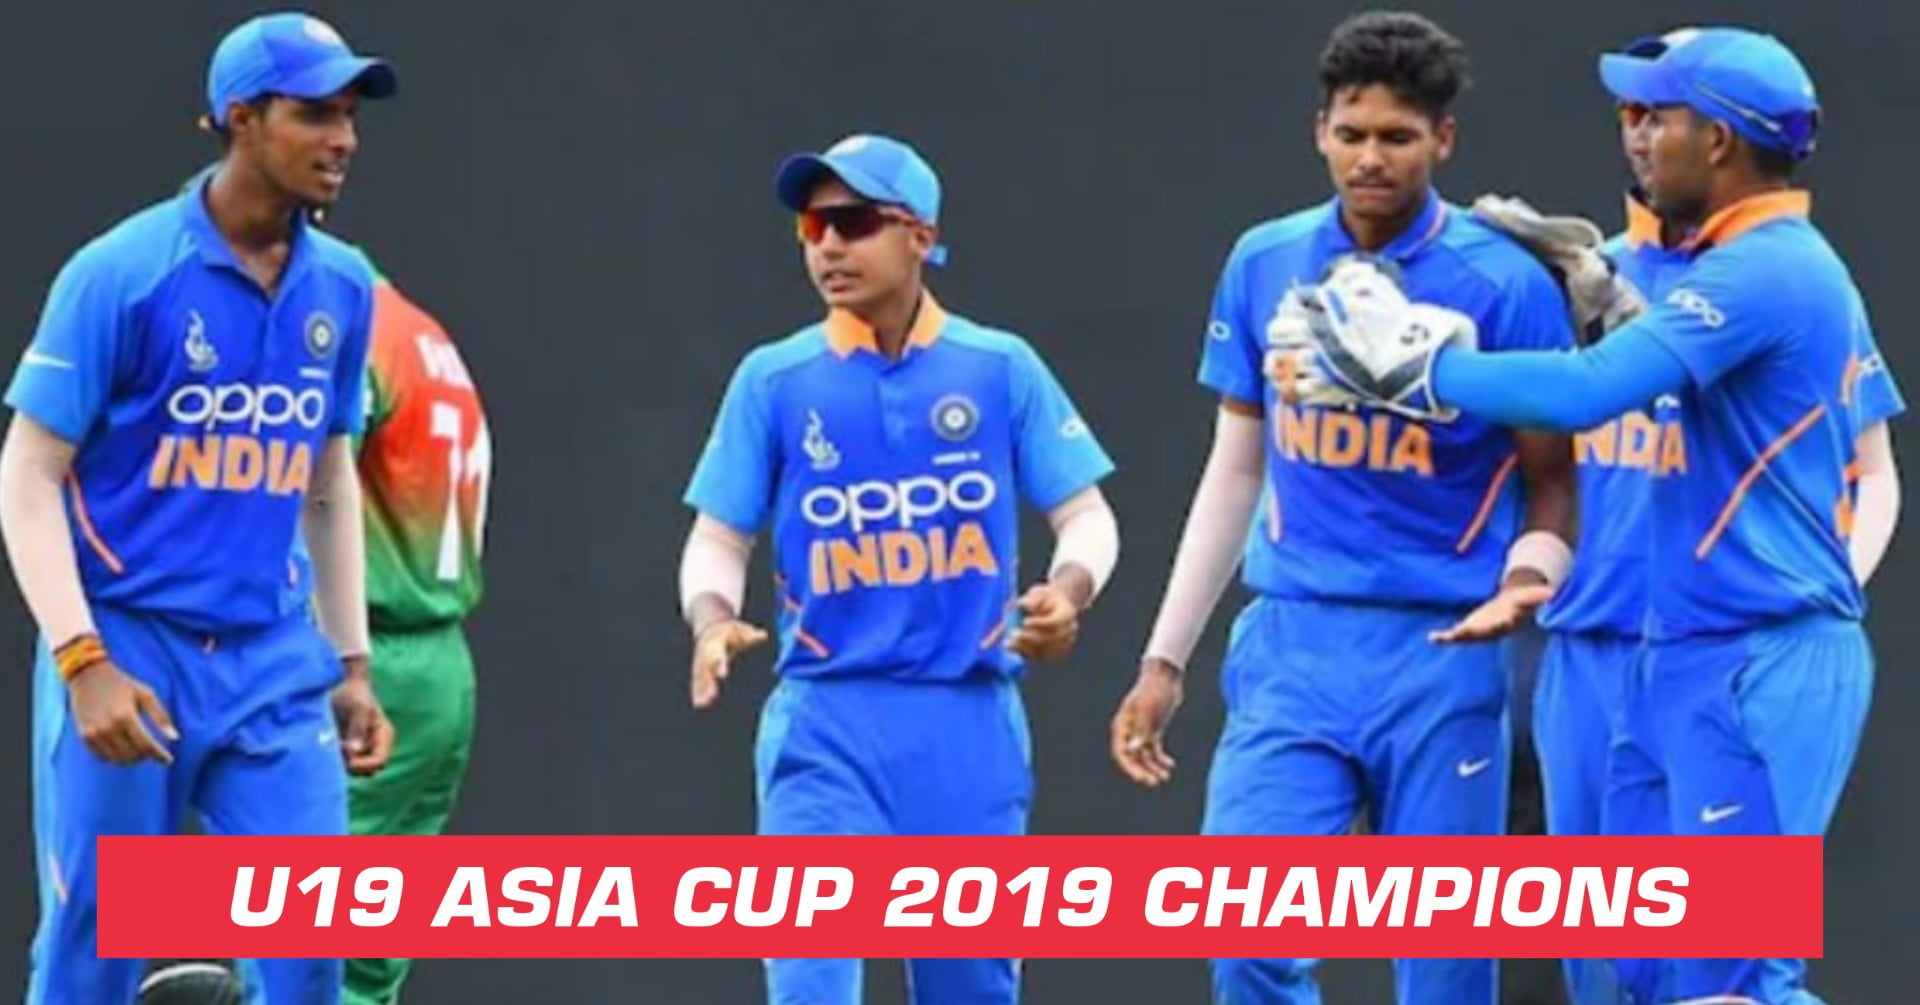 India U19 Wins The Asia Cup Title by Defeating Bangladesh